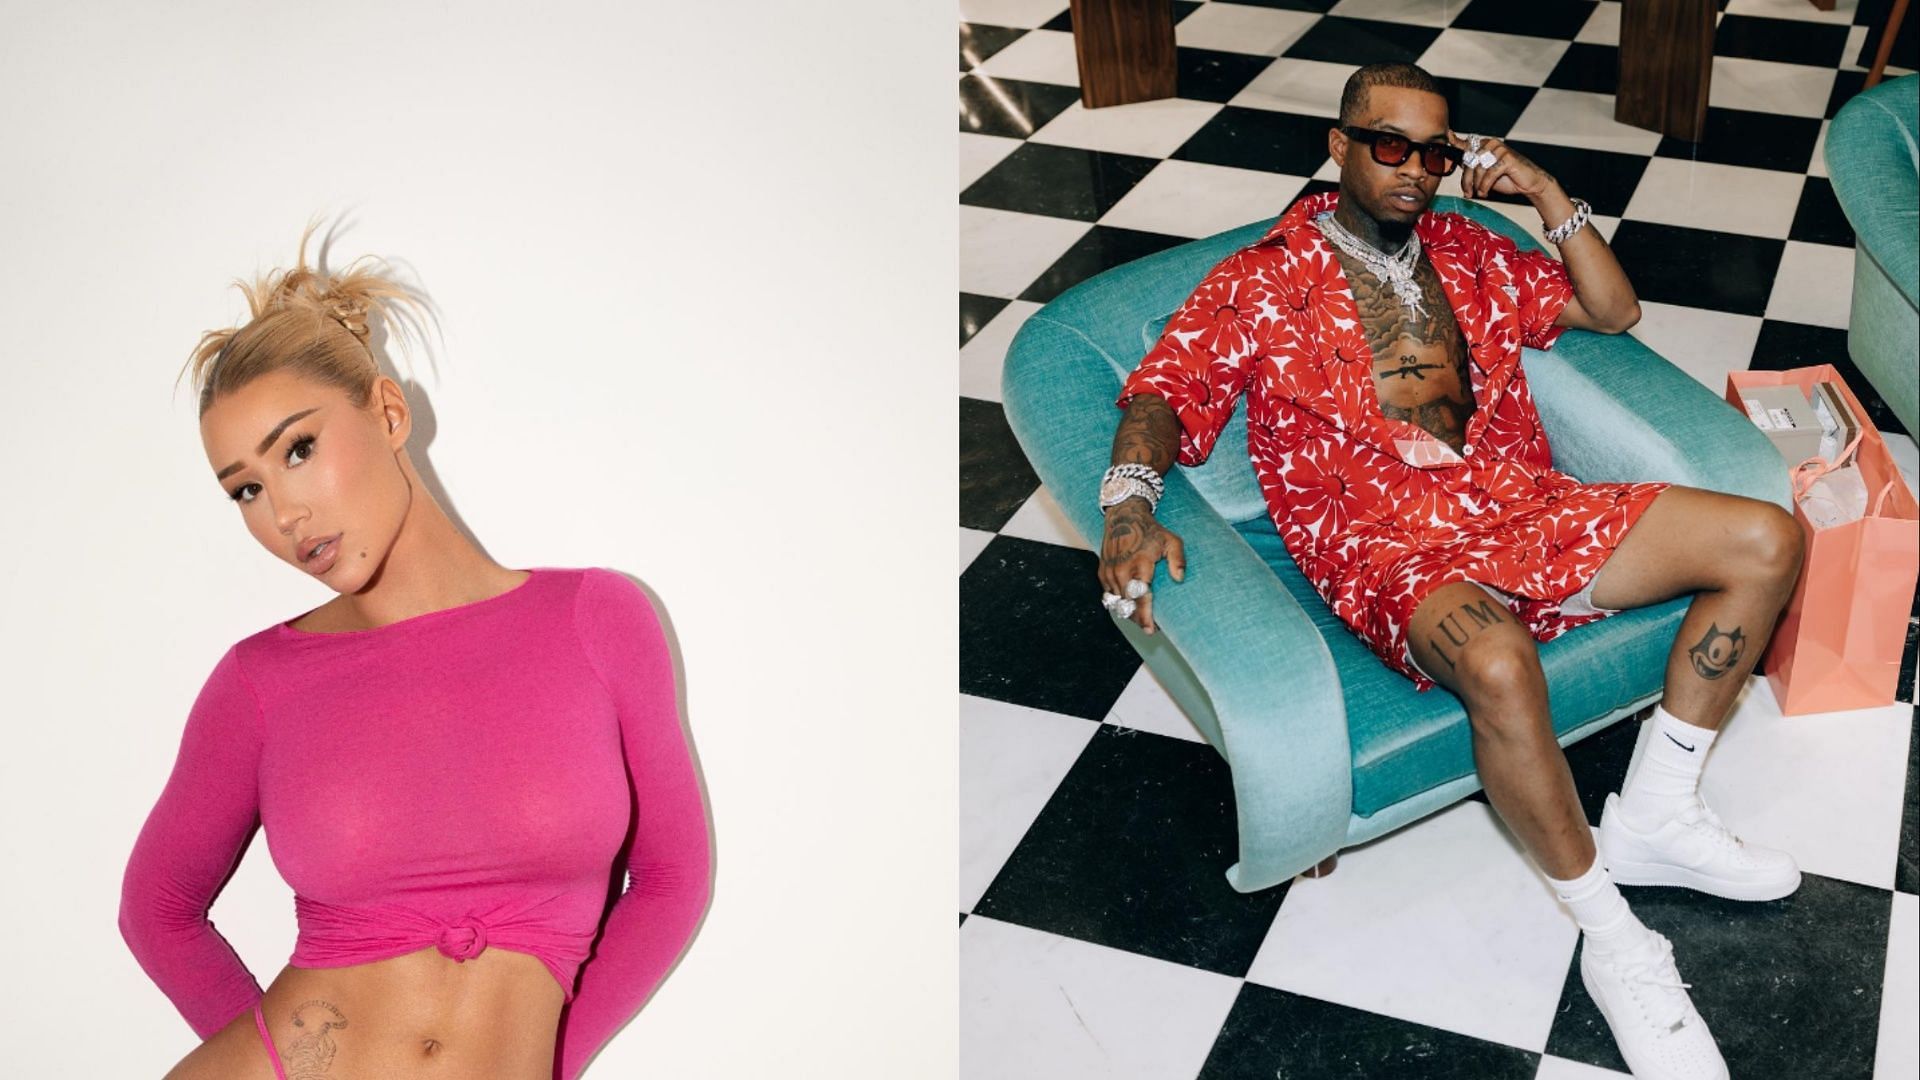 Iggy Azalea sent a letter of support as part of Tory Lanez